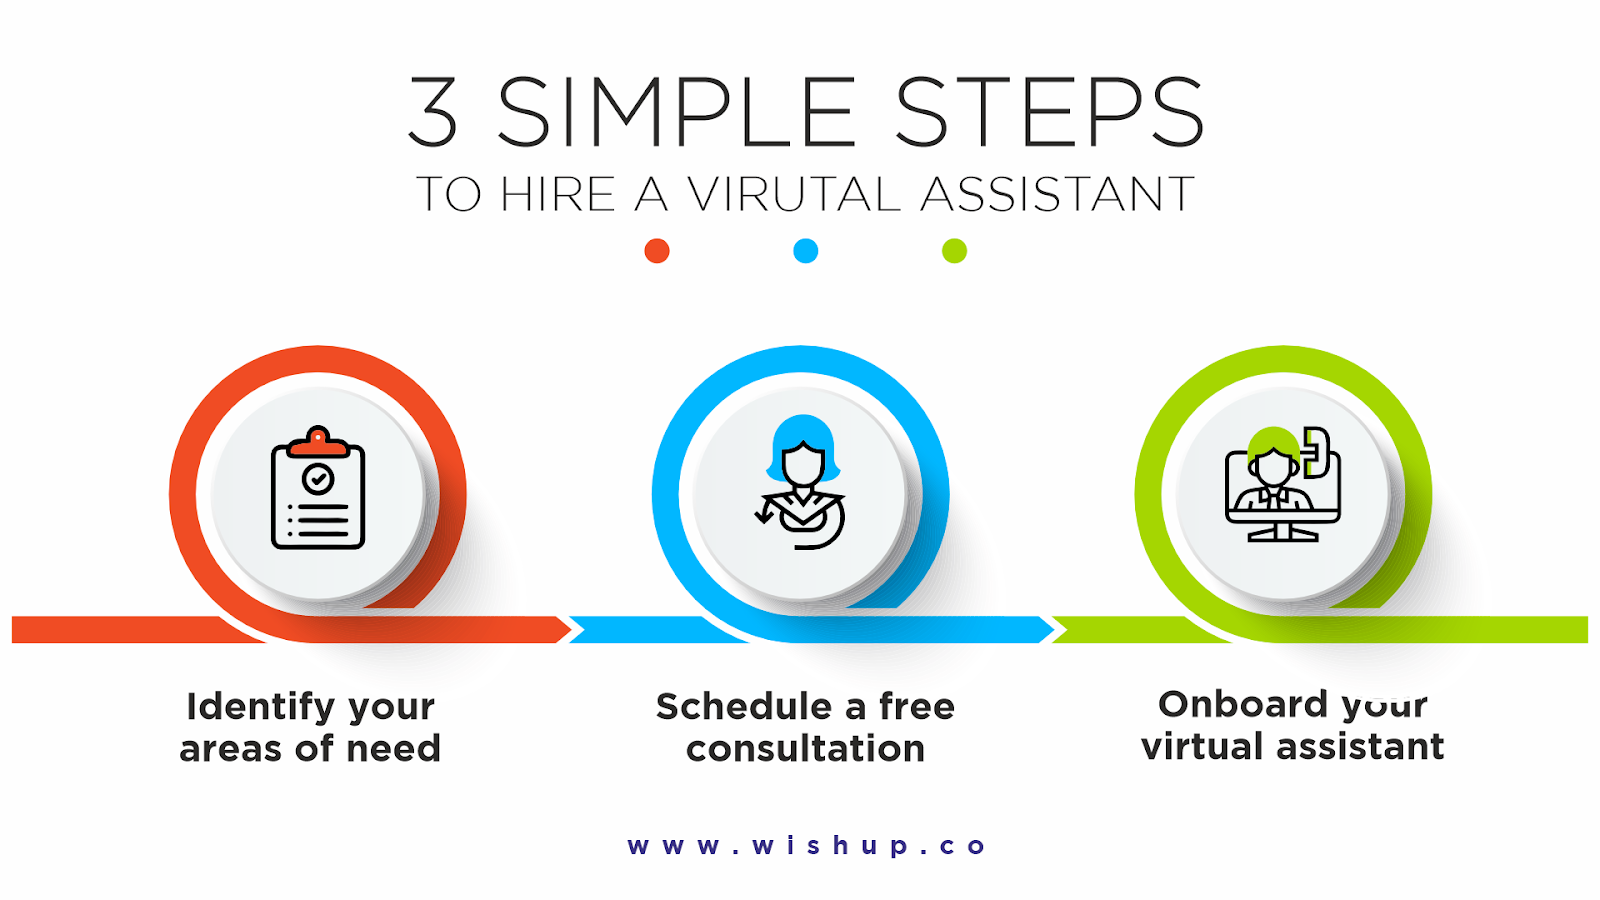 Infographic describing the three simple steps to hire a virtual assistant from Wishup